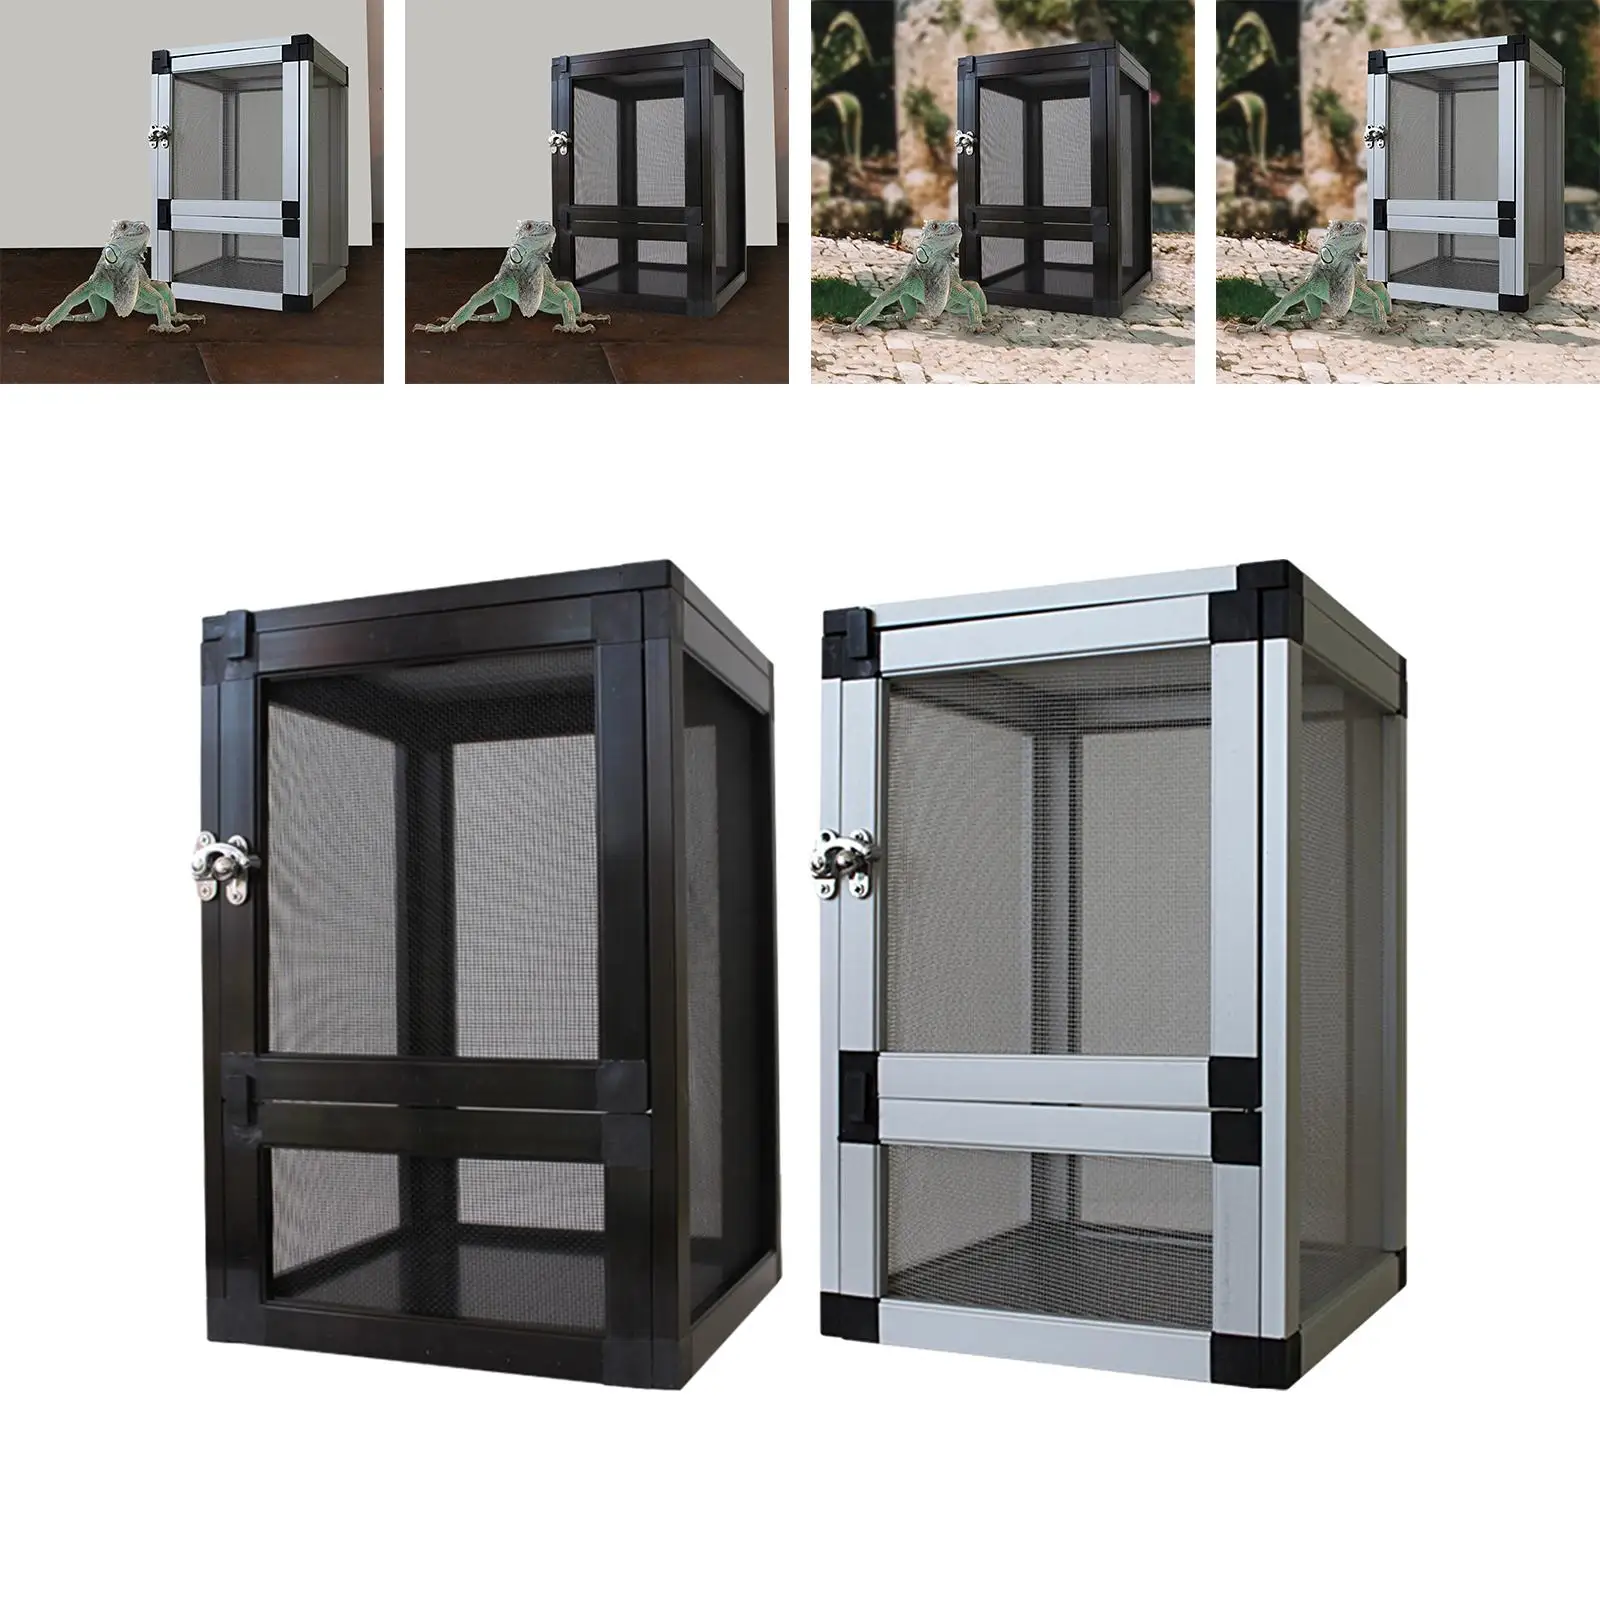 Air Screen Cages with Door and Latch Reptile Cage Breeding Box Reptiles Habitat for Frog Crickets Butterflies Lizards Snake